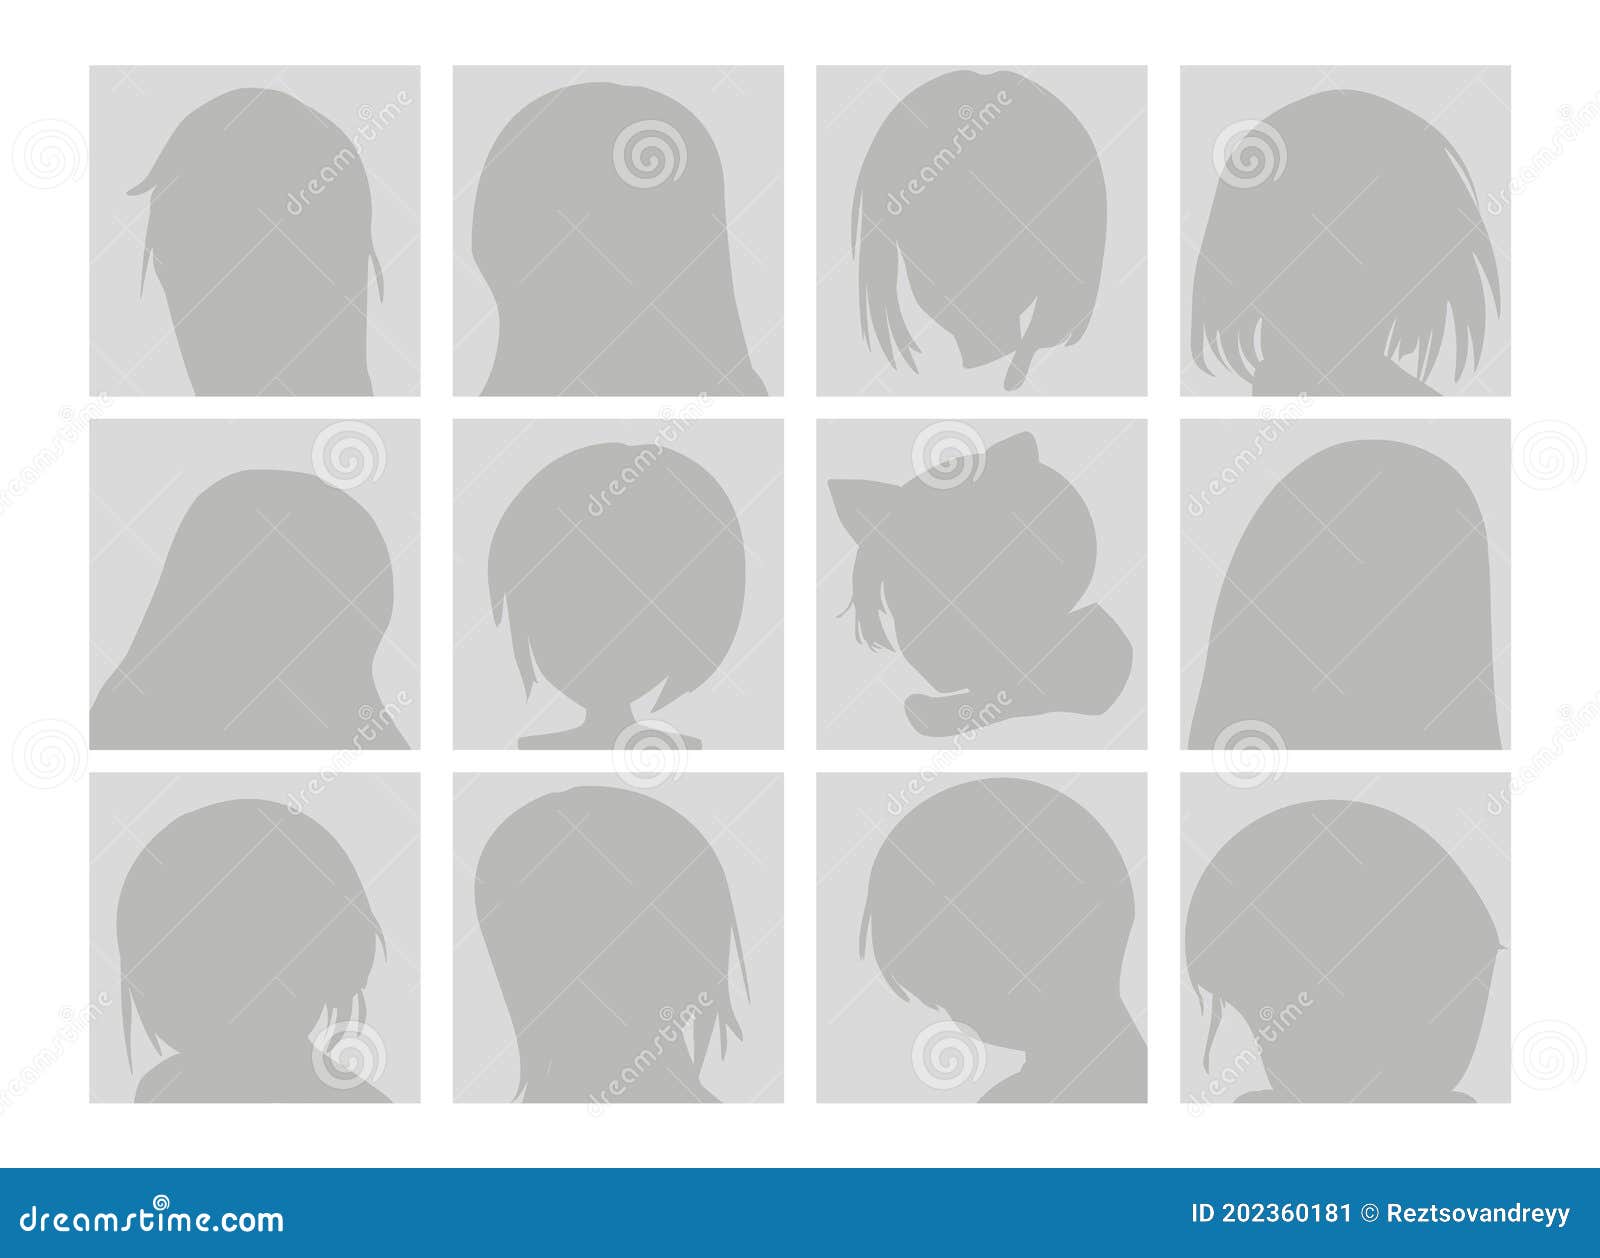 Vector Big Set of Anime Faces with Hair. Flat Gray Icons of Girls for Web  and Mobile Stock Illustration - Illustration of silhouette, person:  202360181